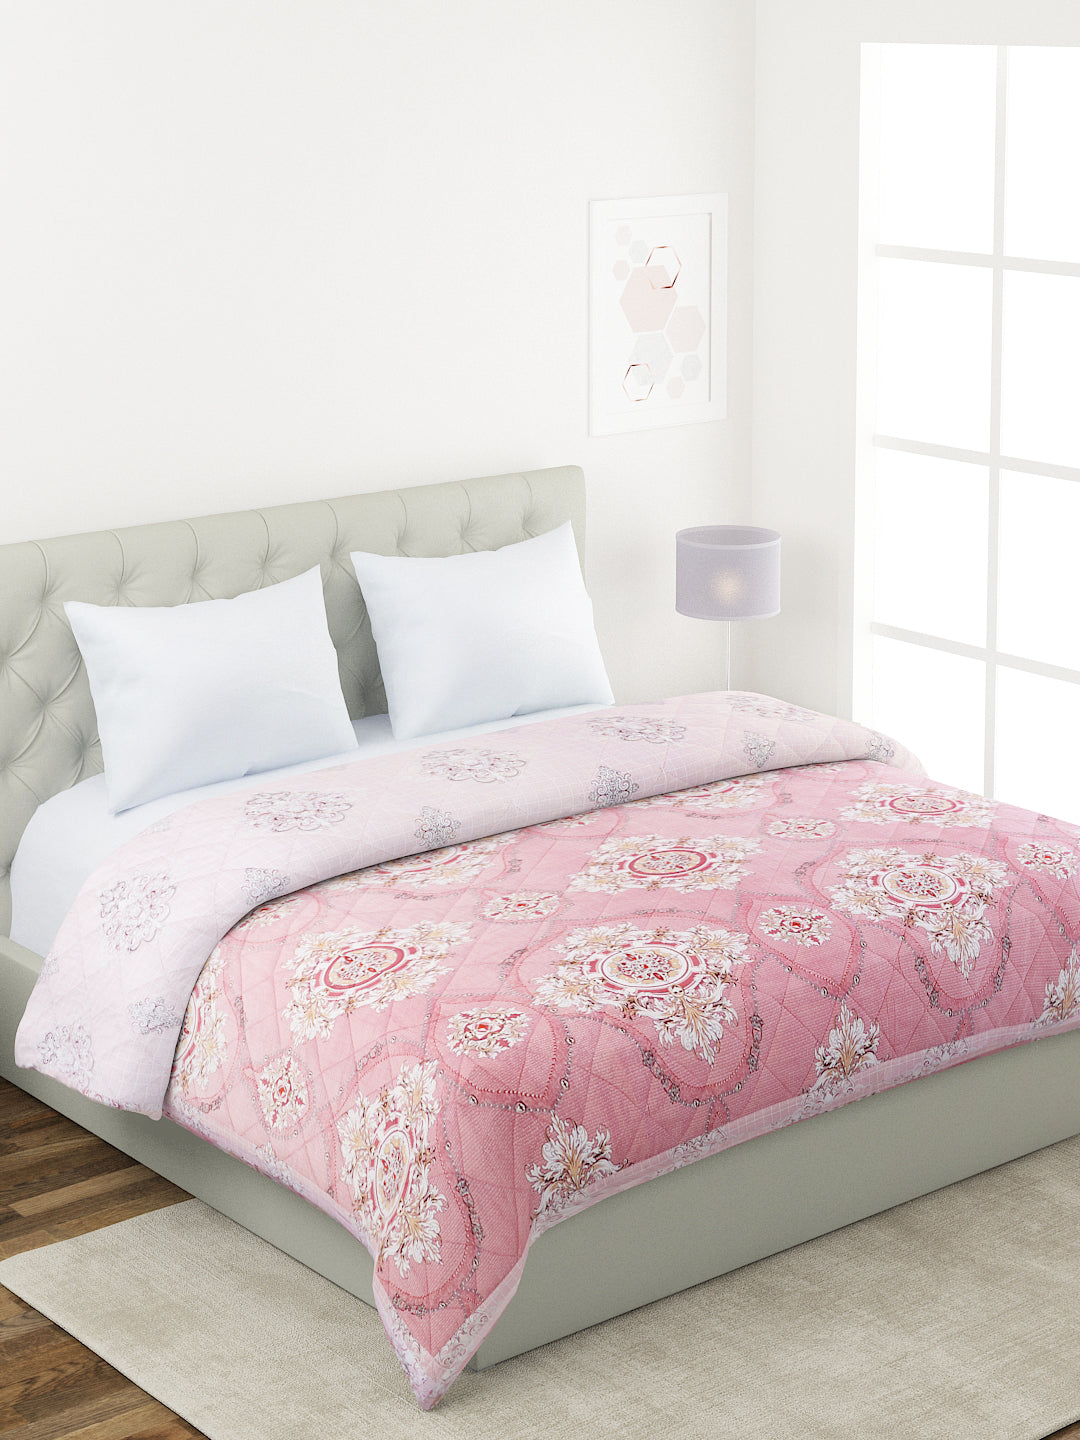 Floral Print Double Bed Light Weight Comforter- Light Pink